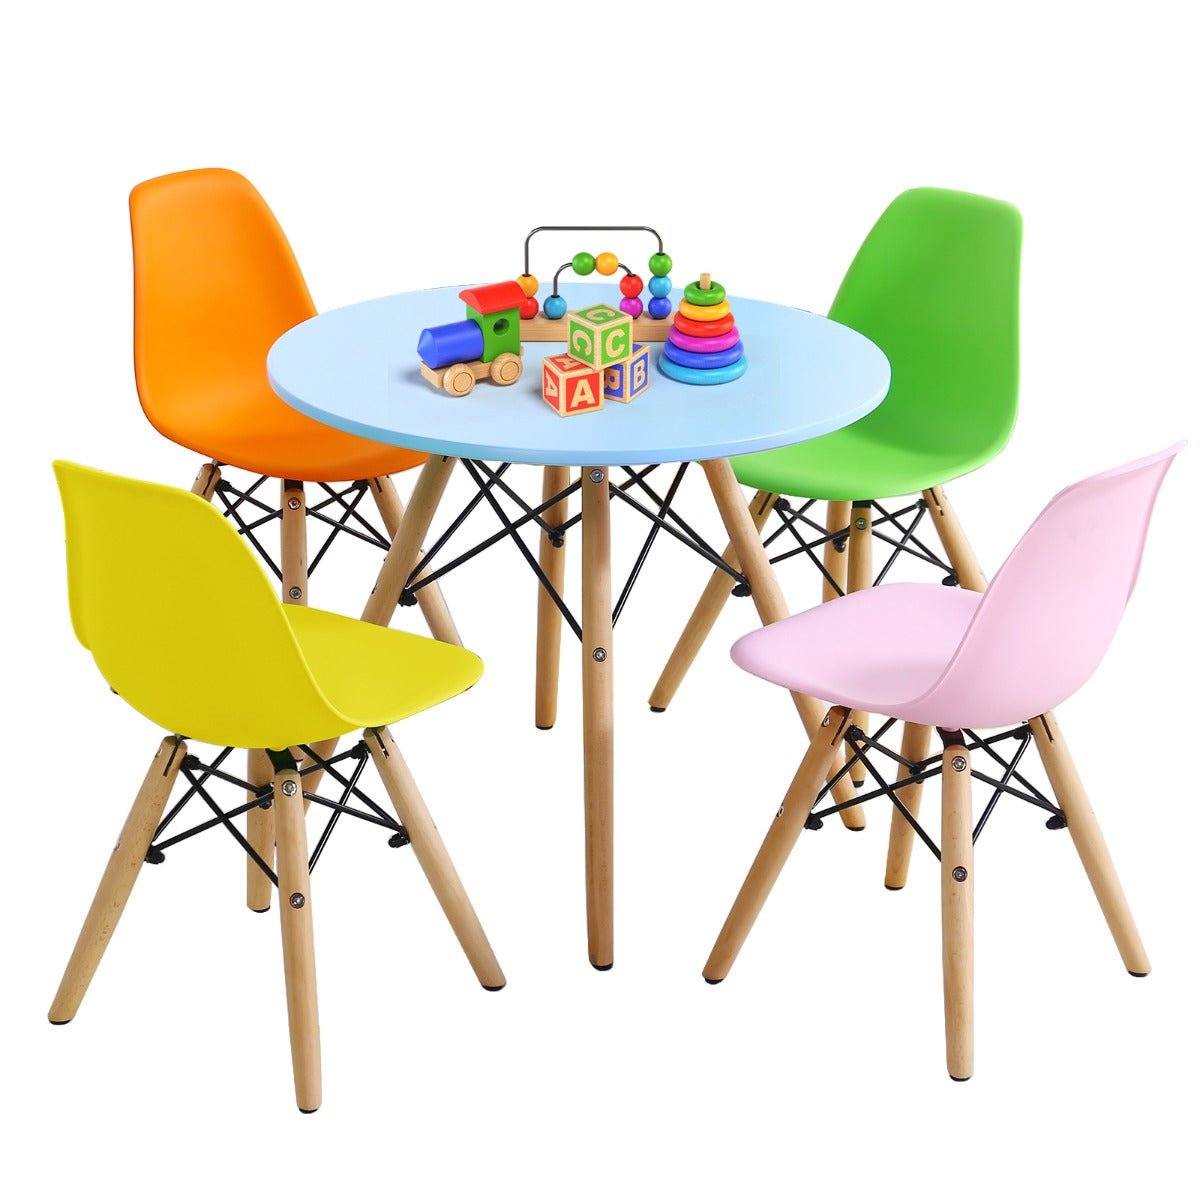 colourful 5-Piece Kids Table and Chairs Set - Learn, Play, and Explore!